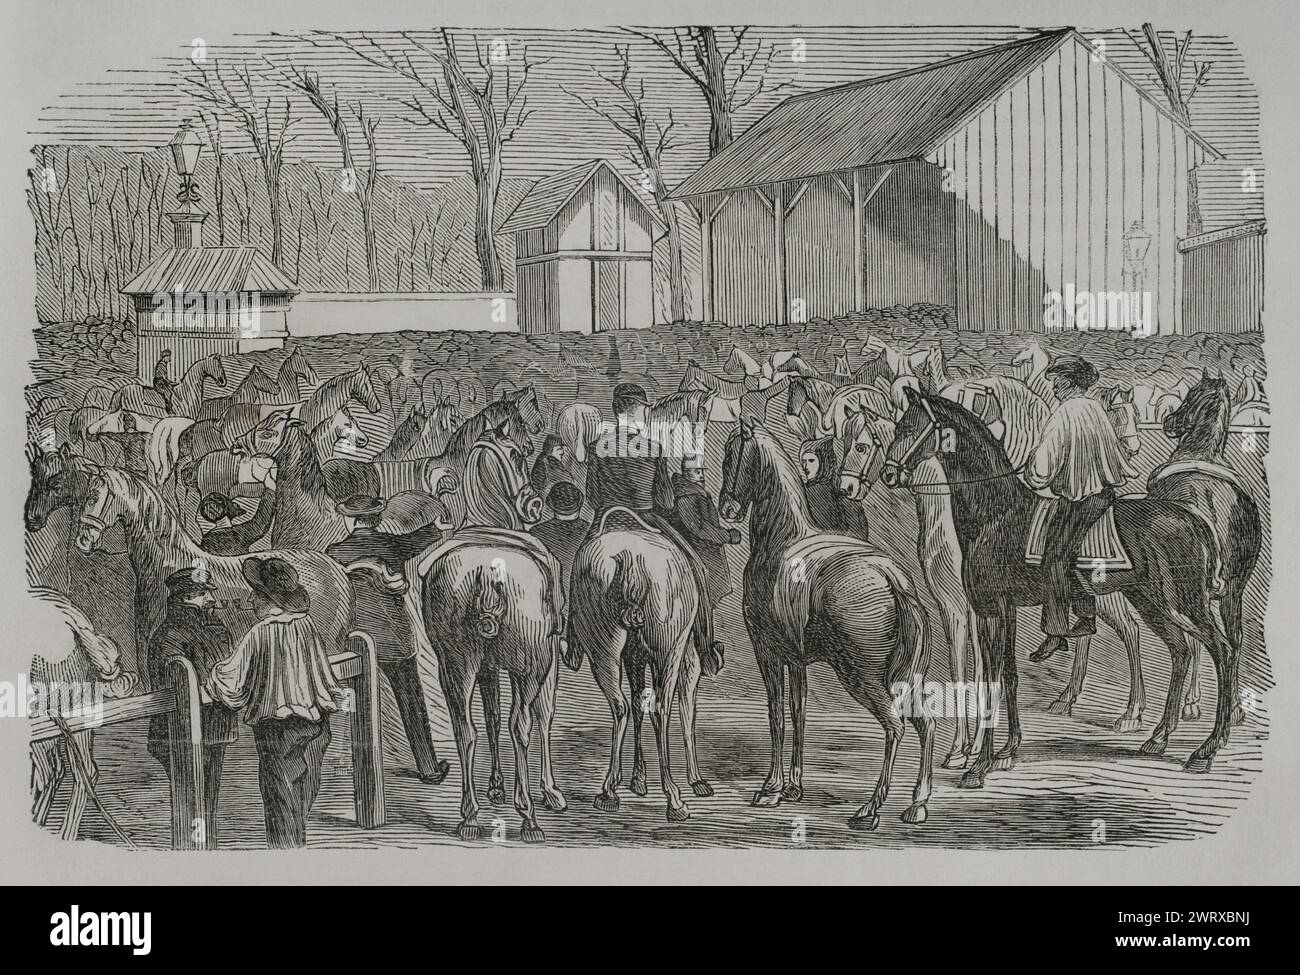 Franco-Prussian War (1870-1871). Siege of Paris (19 September 1870 to 28 January 1871). Horse market during the siege of the city by the Prussians. Engraving. "Historia de la Guerra de Francia y Prusia" (History of the War between France and Prussia). Volume II. Published in Barcelona, 1871. Stock Photo